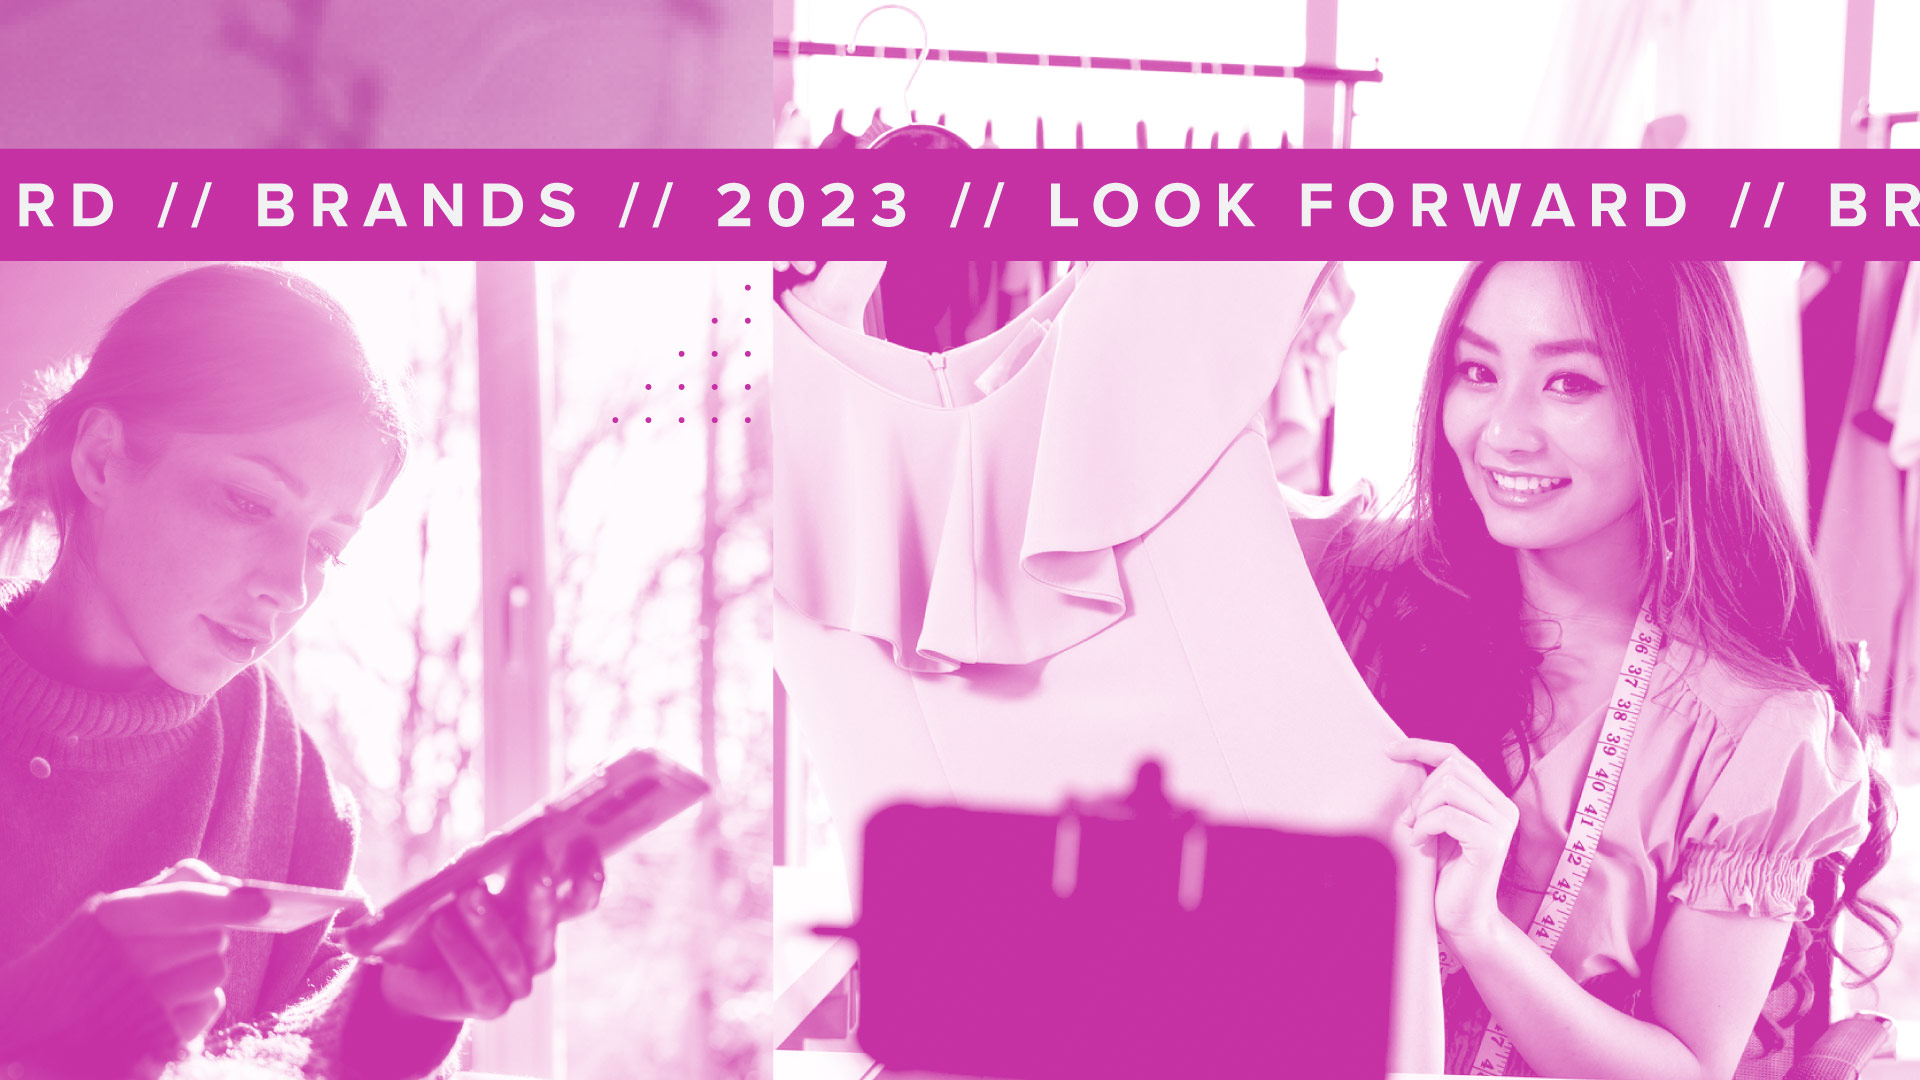 Graphic conveying the future of Brands for 2023